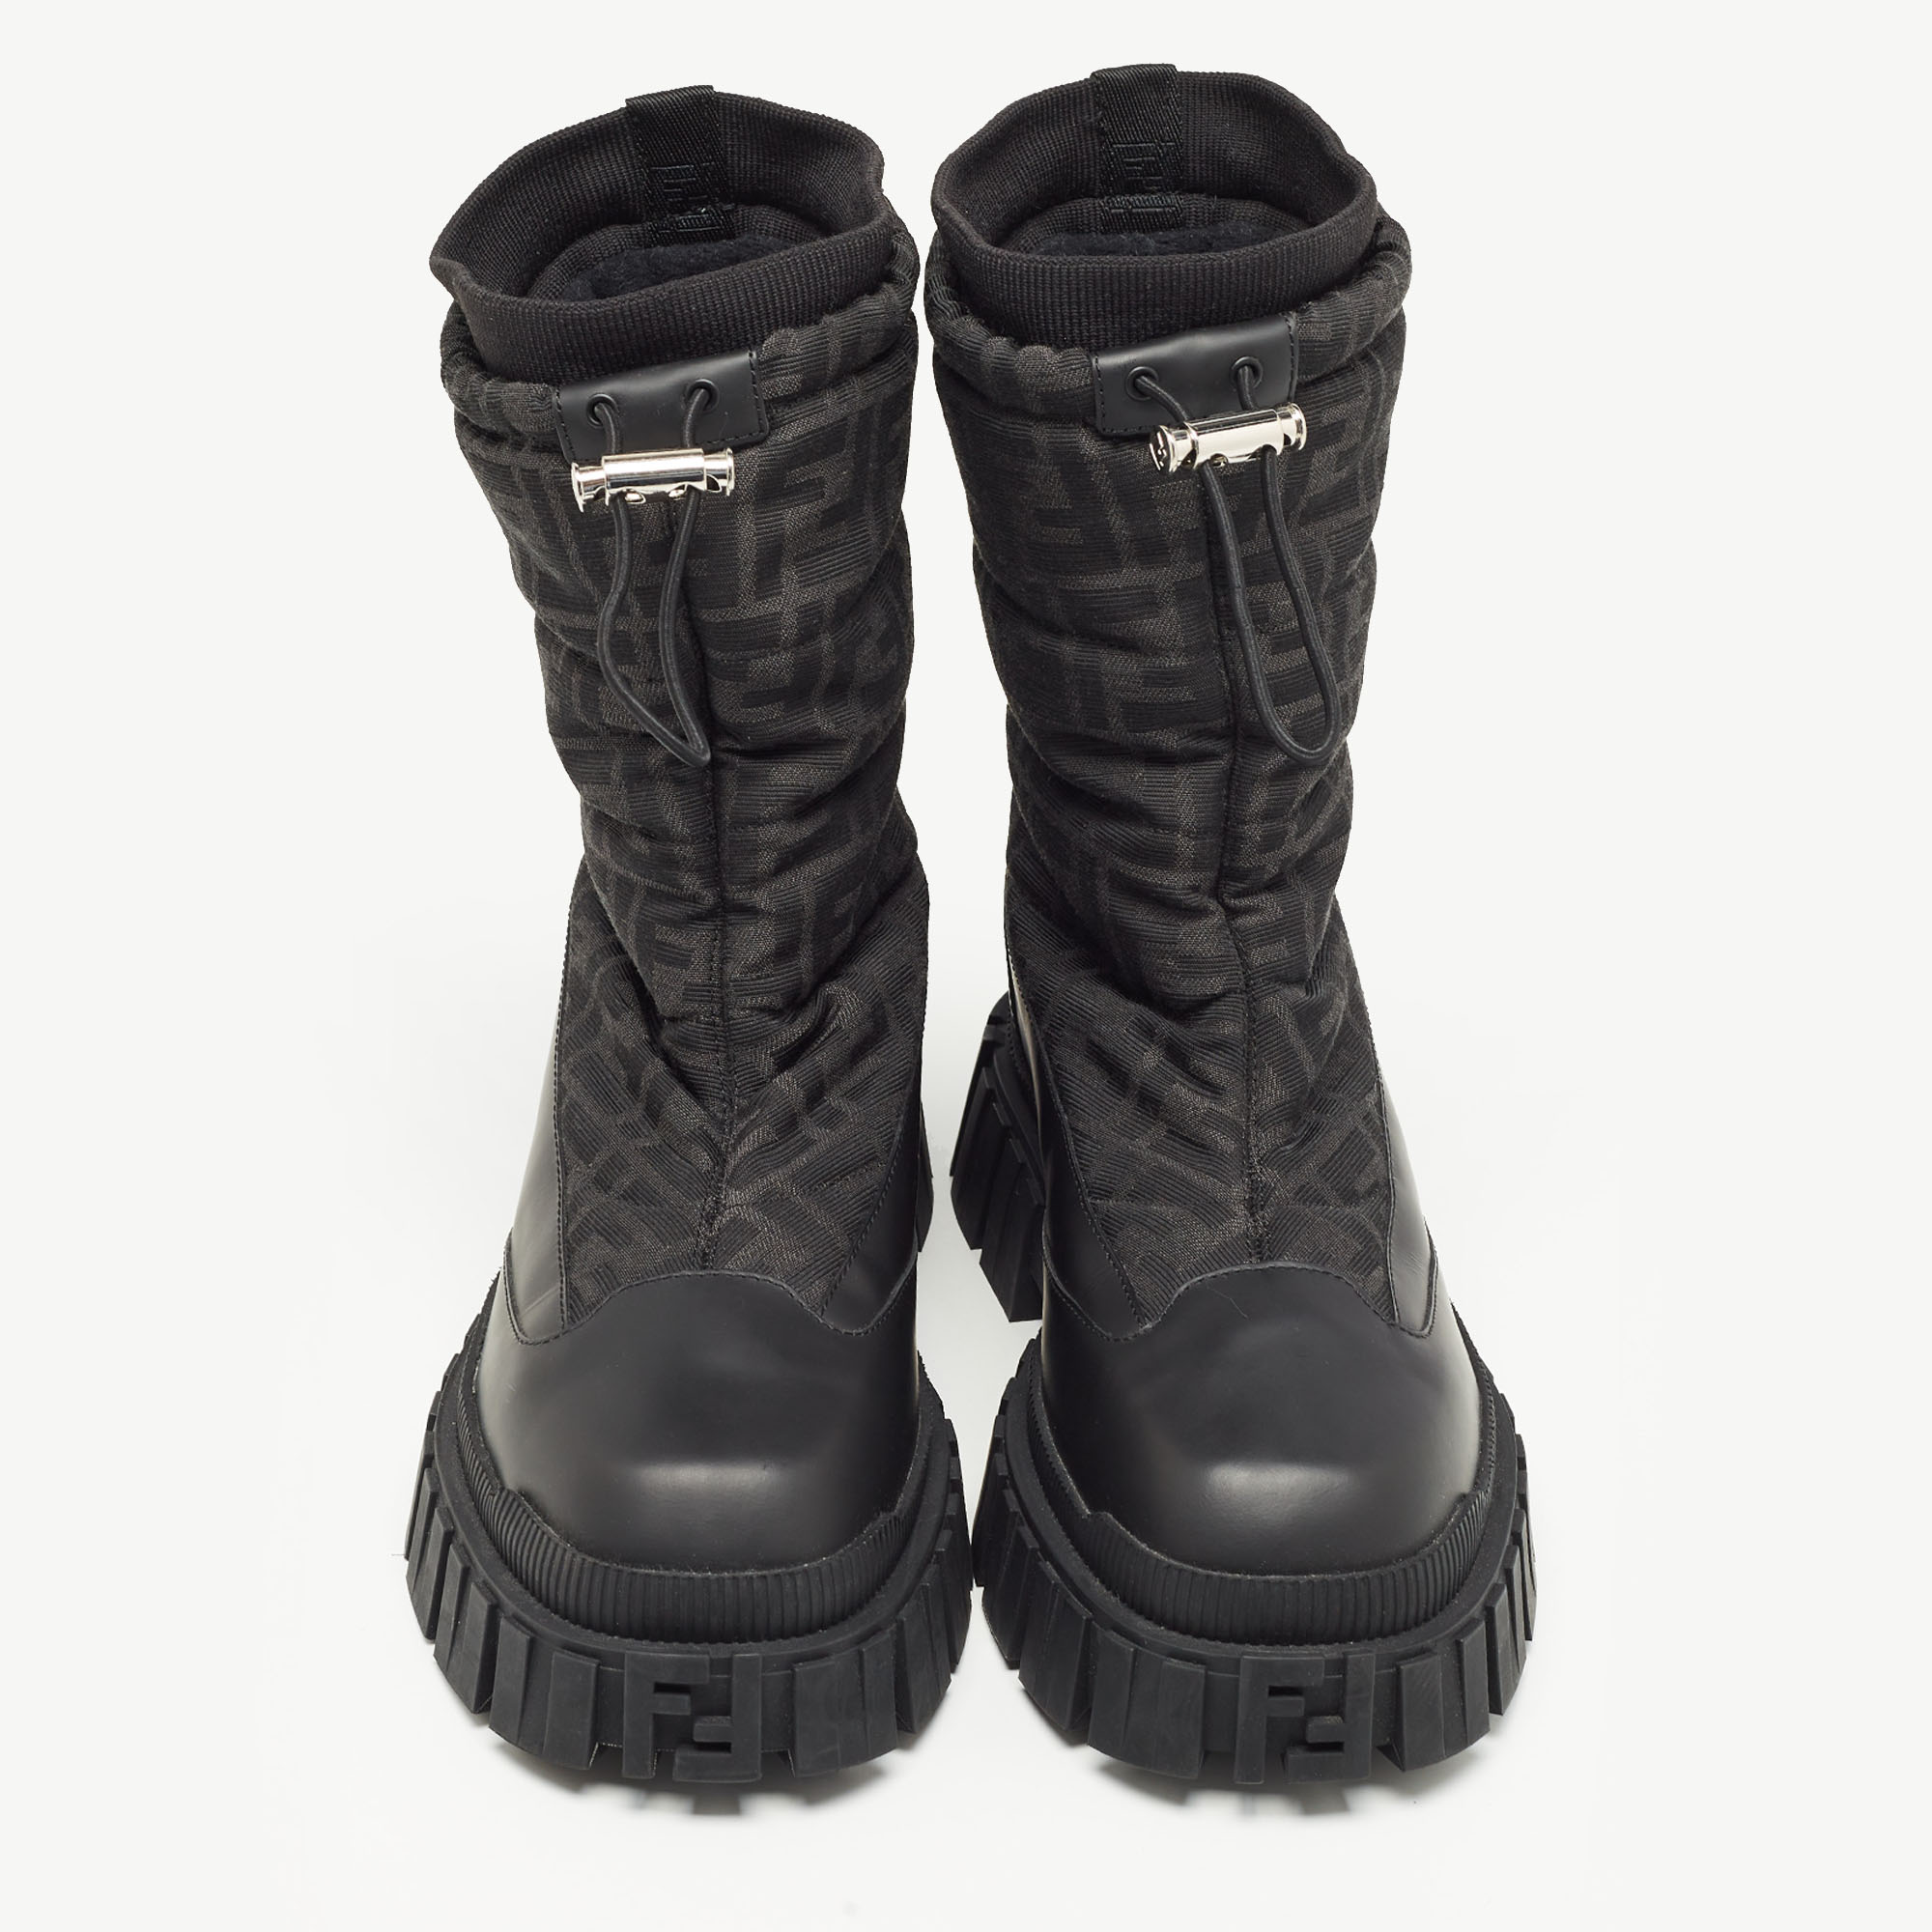 Fendi Black Fabric And Leather Snow Boots Size 42